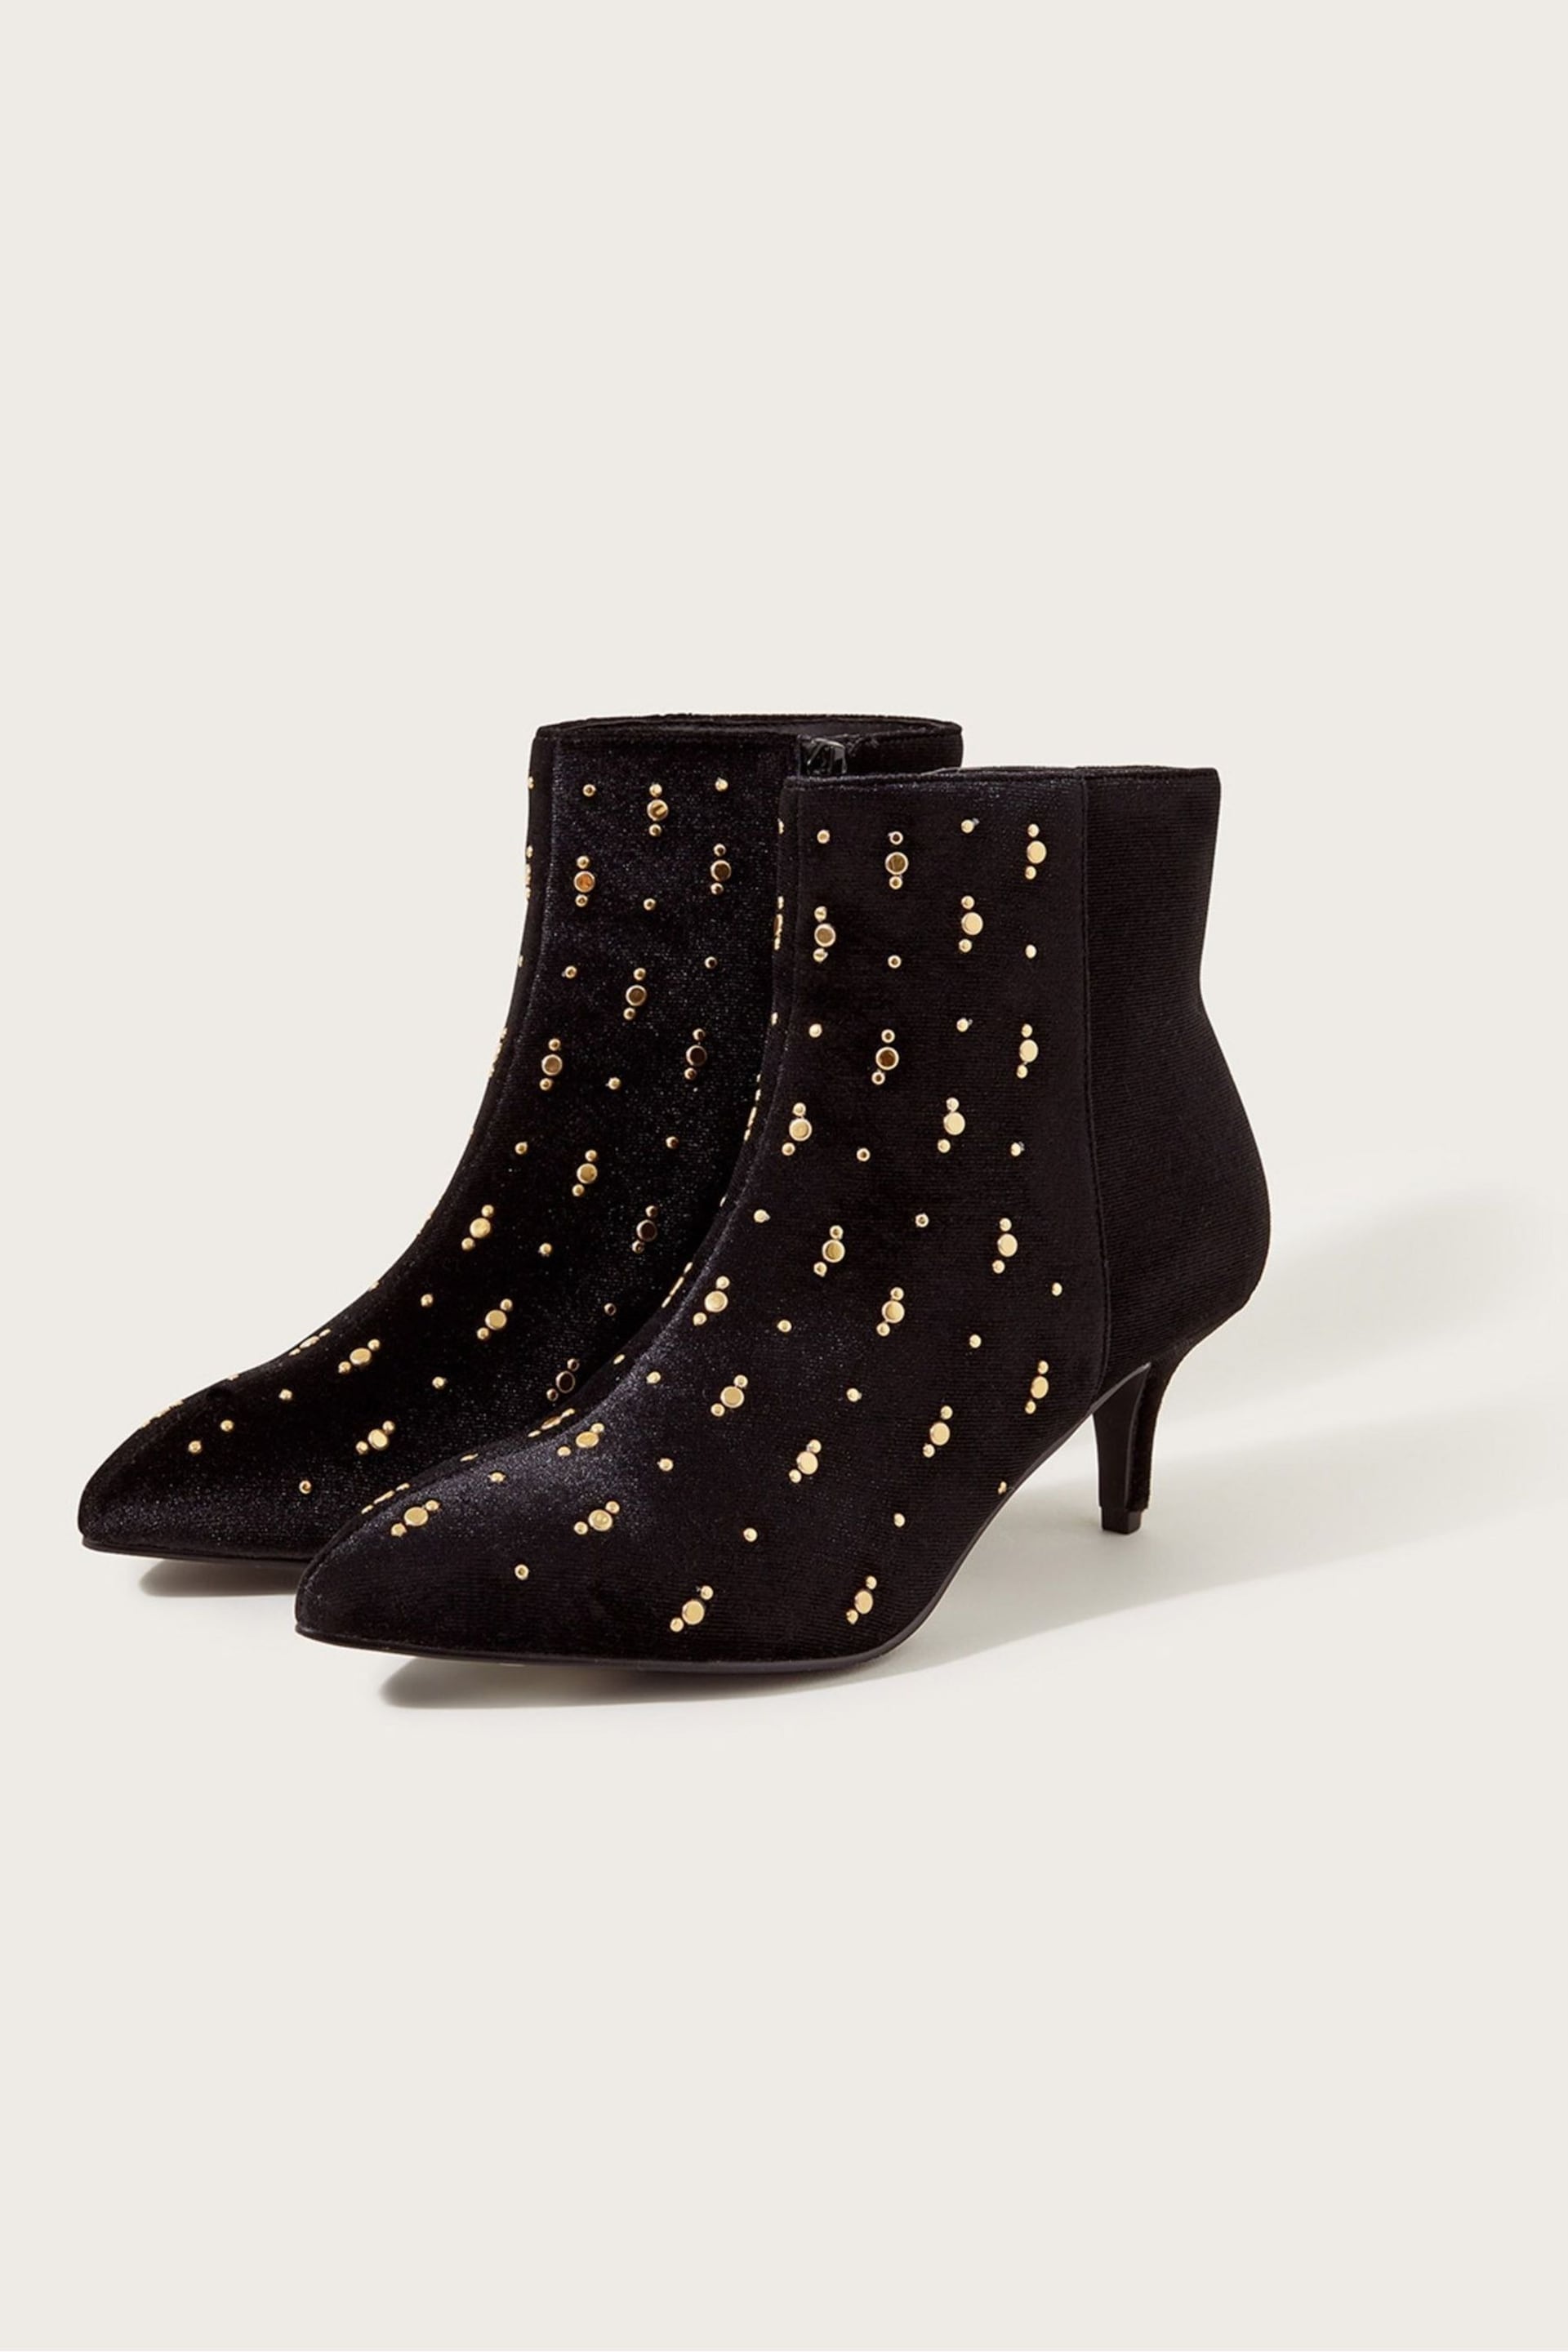 Monsoon Black Stud Ankle Boots - Image 1 of 3